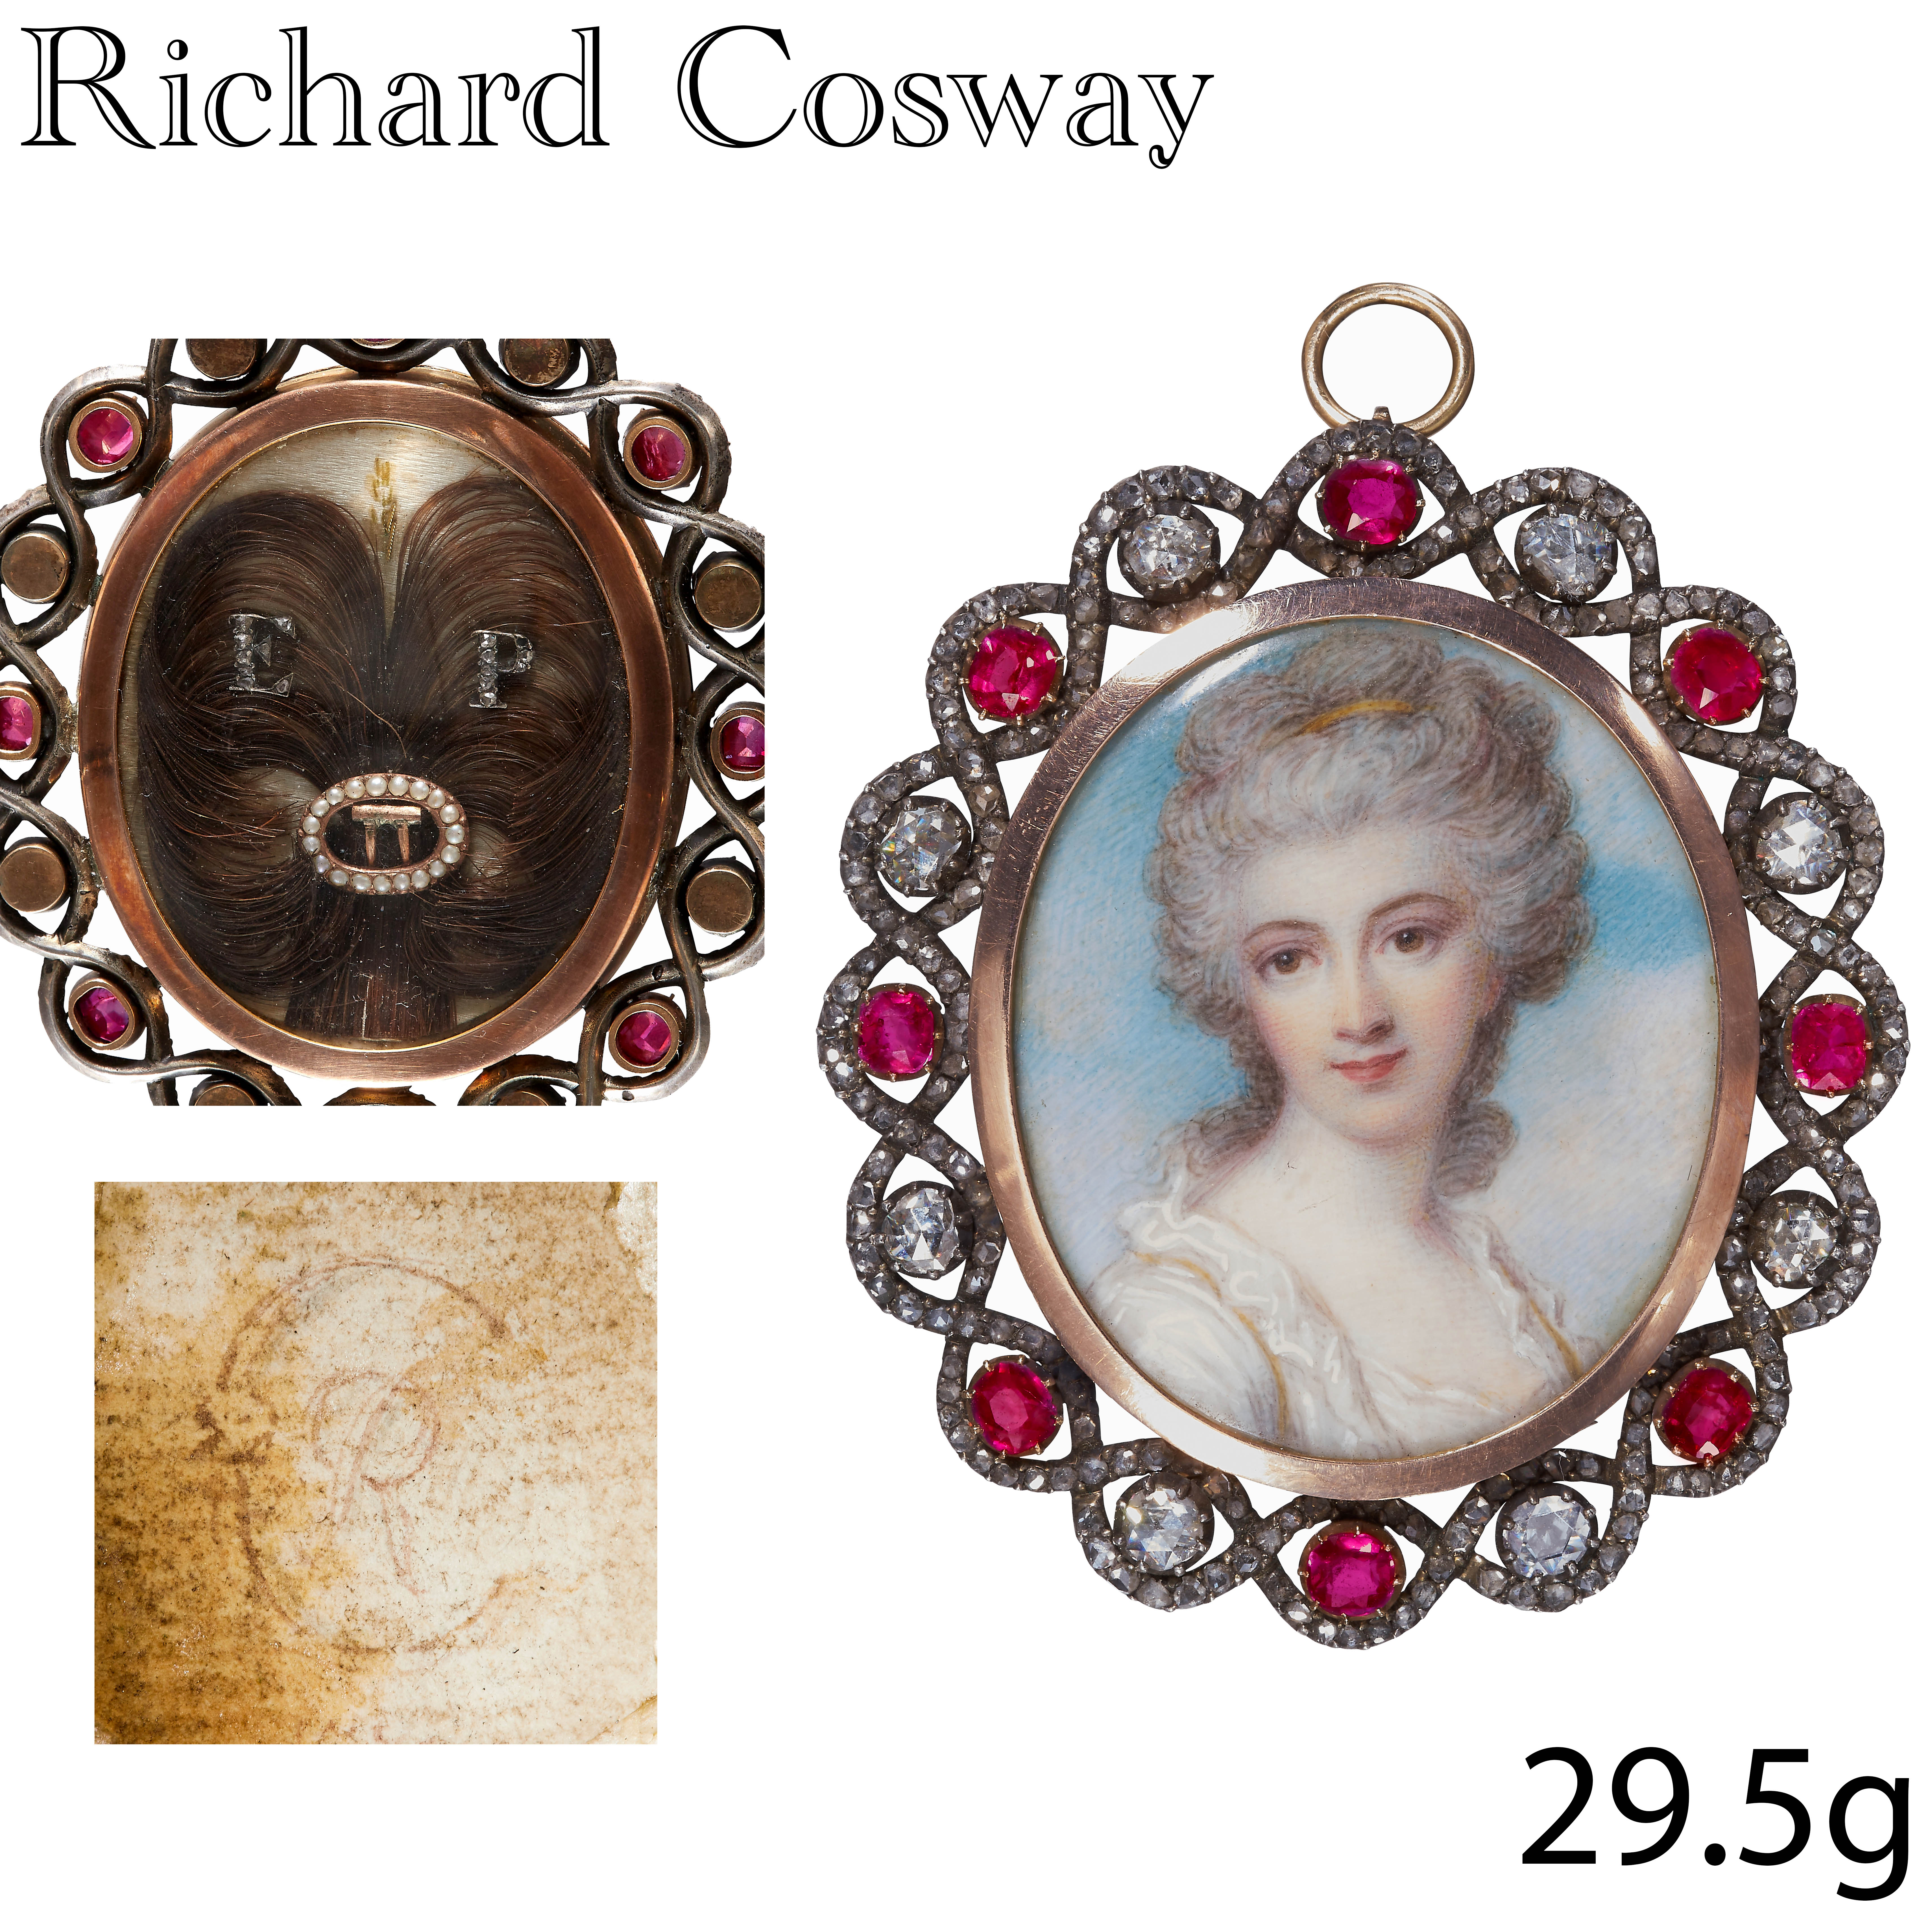 RICHARD COSWAY (1742-1821). MAGNIFICENT AND AMAZING RUBY AND DIAMOND FRAMED PORTRAIT MINIATURE